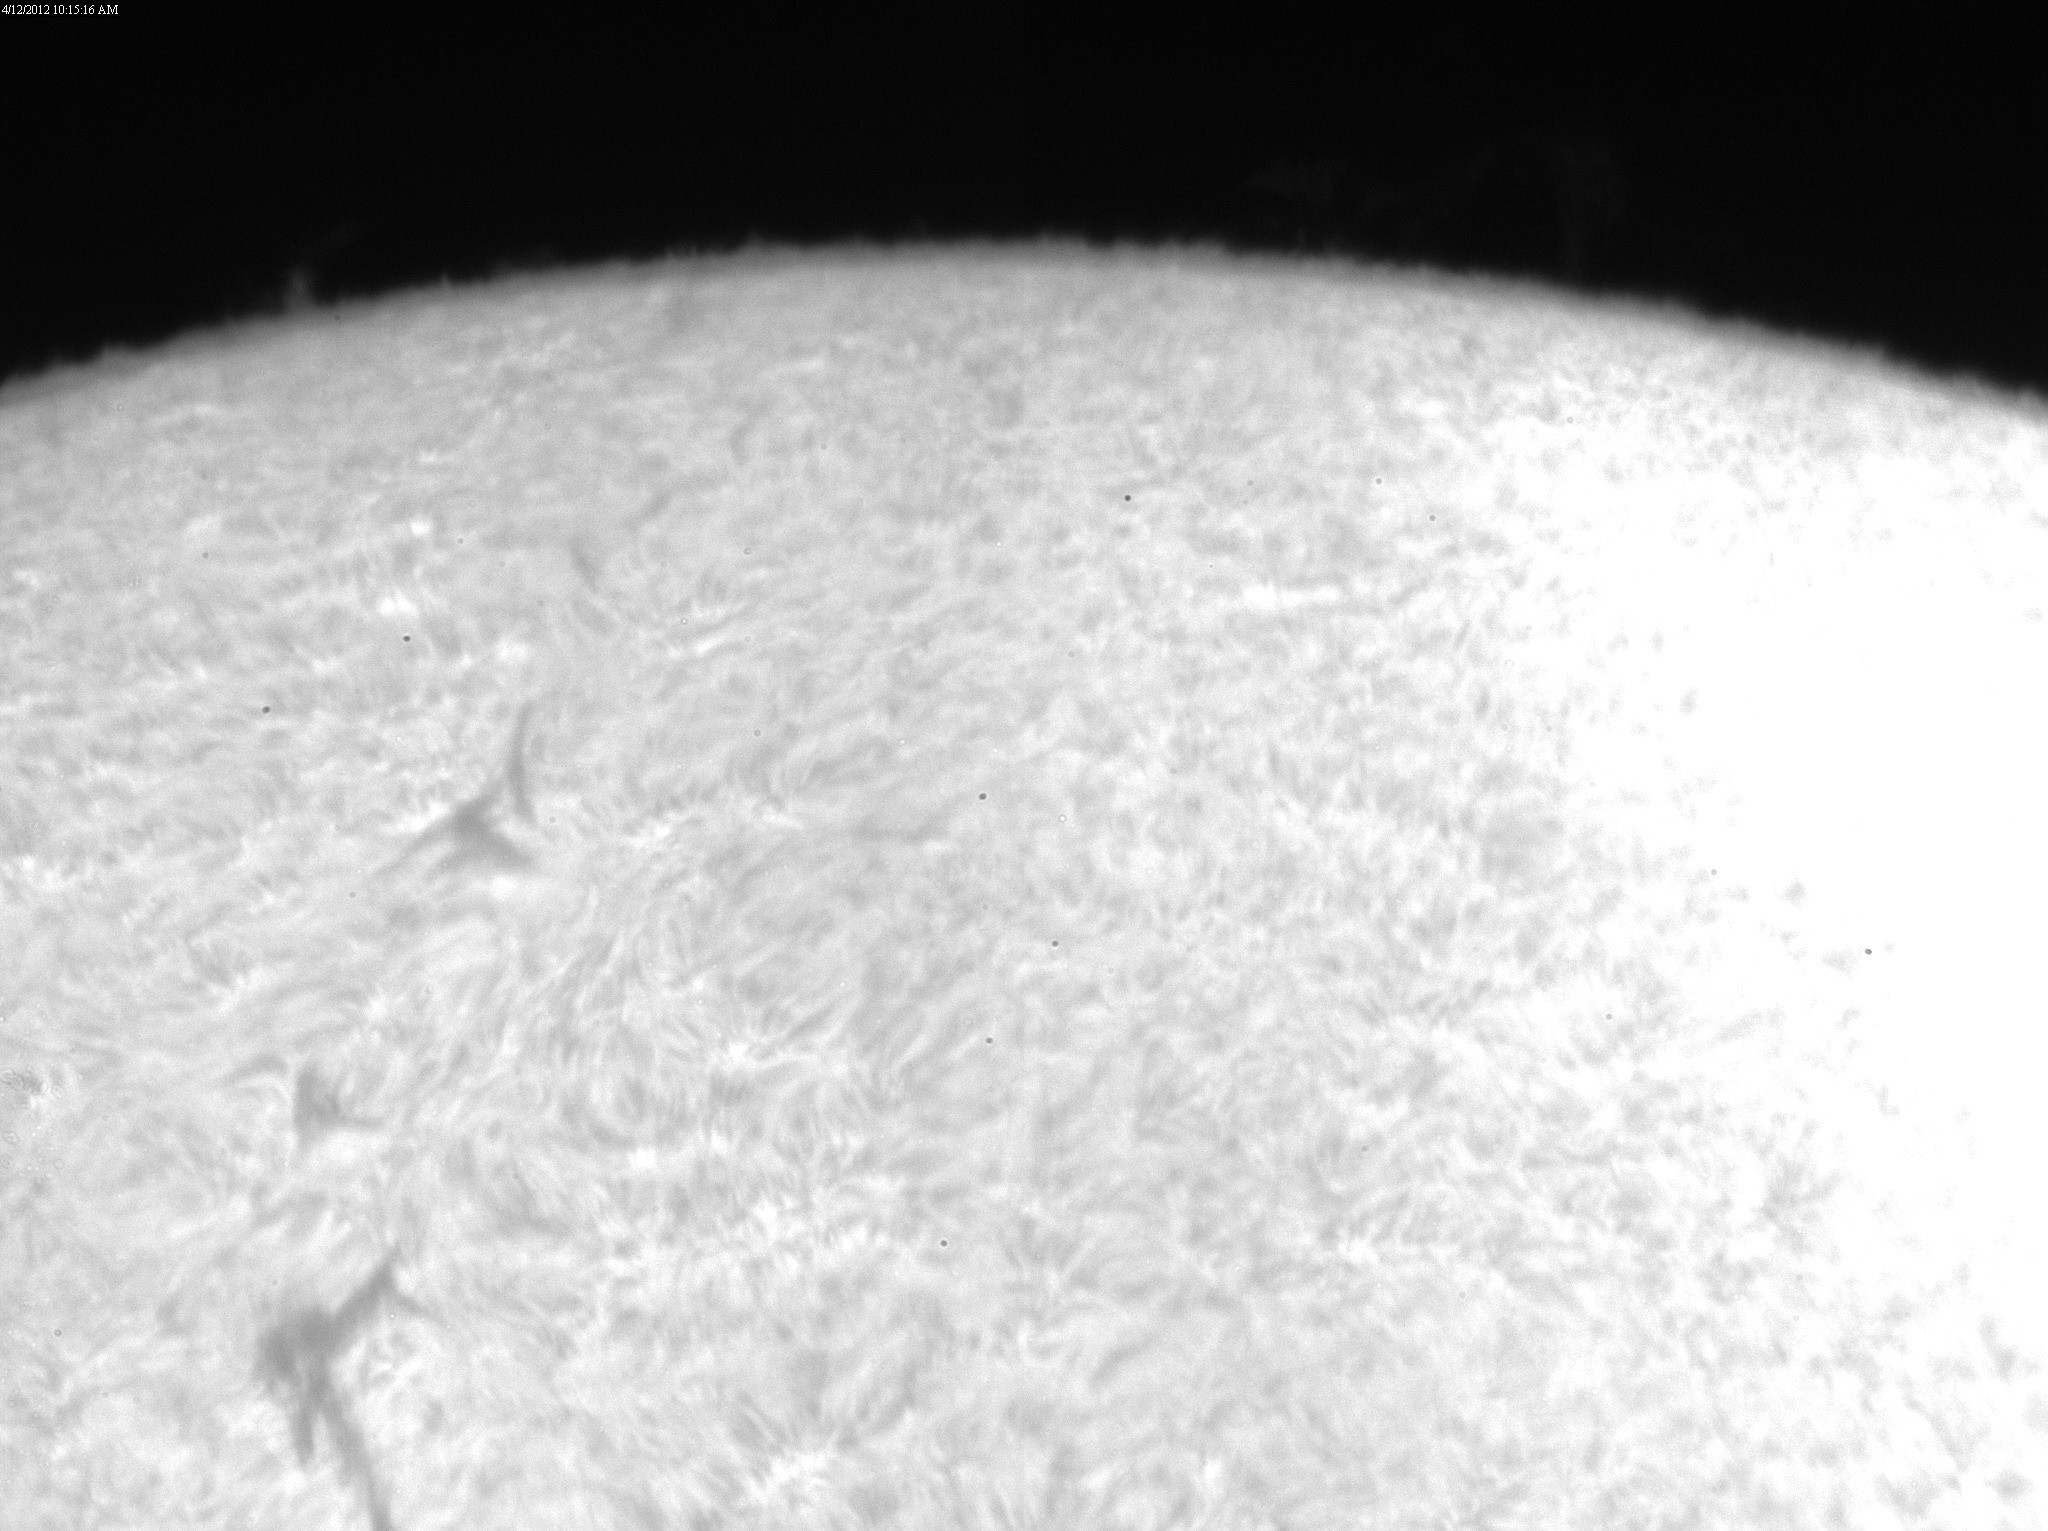 2012 Apr 12 Sun - filaments and plage